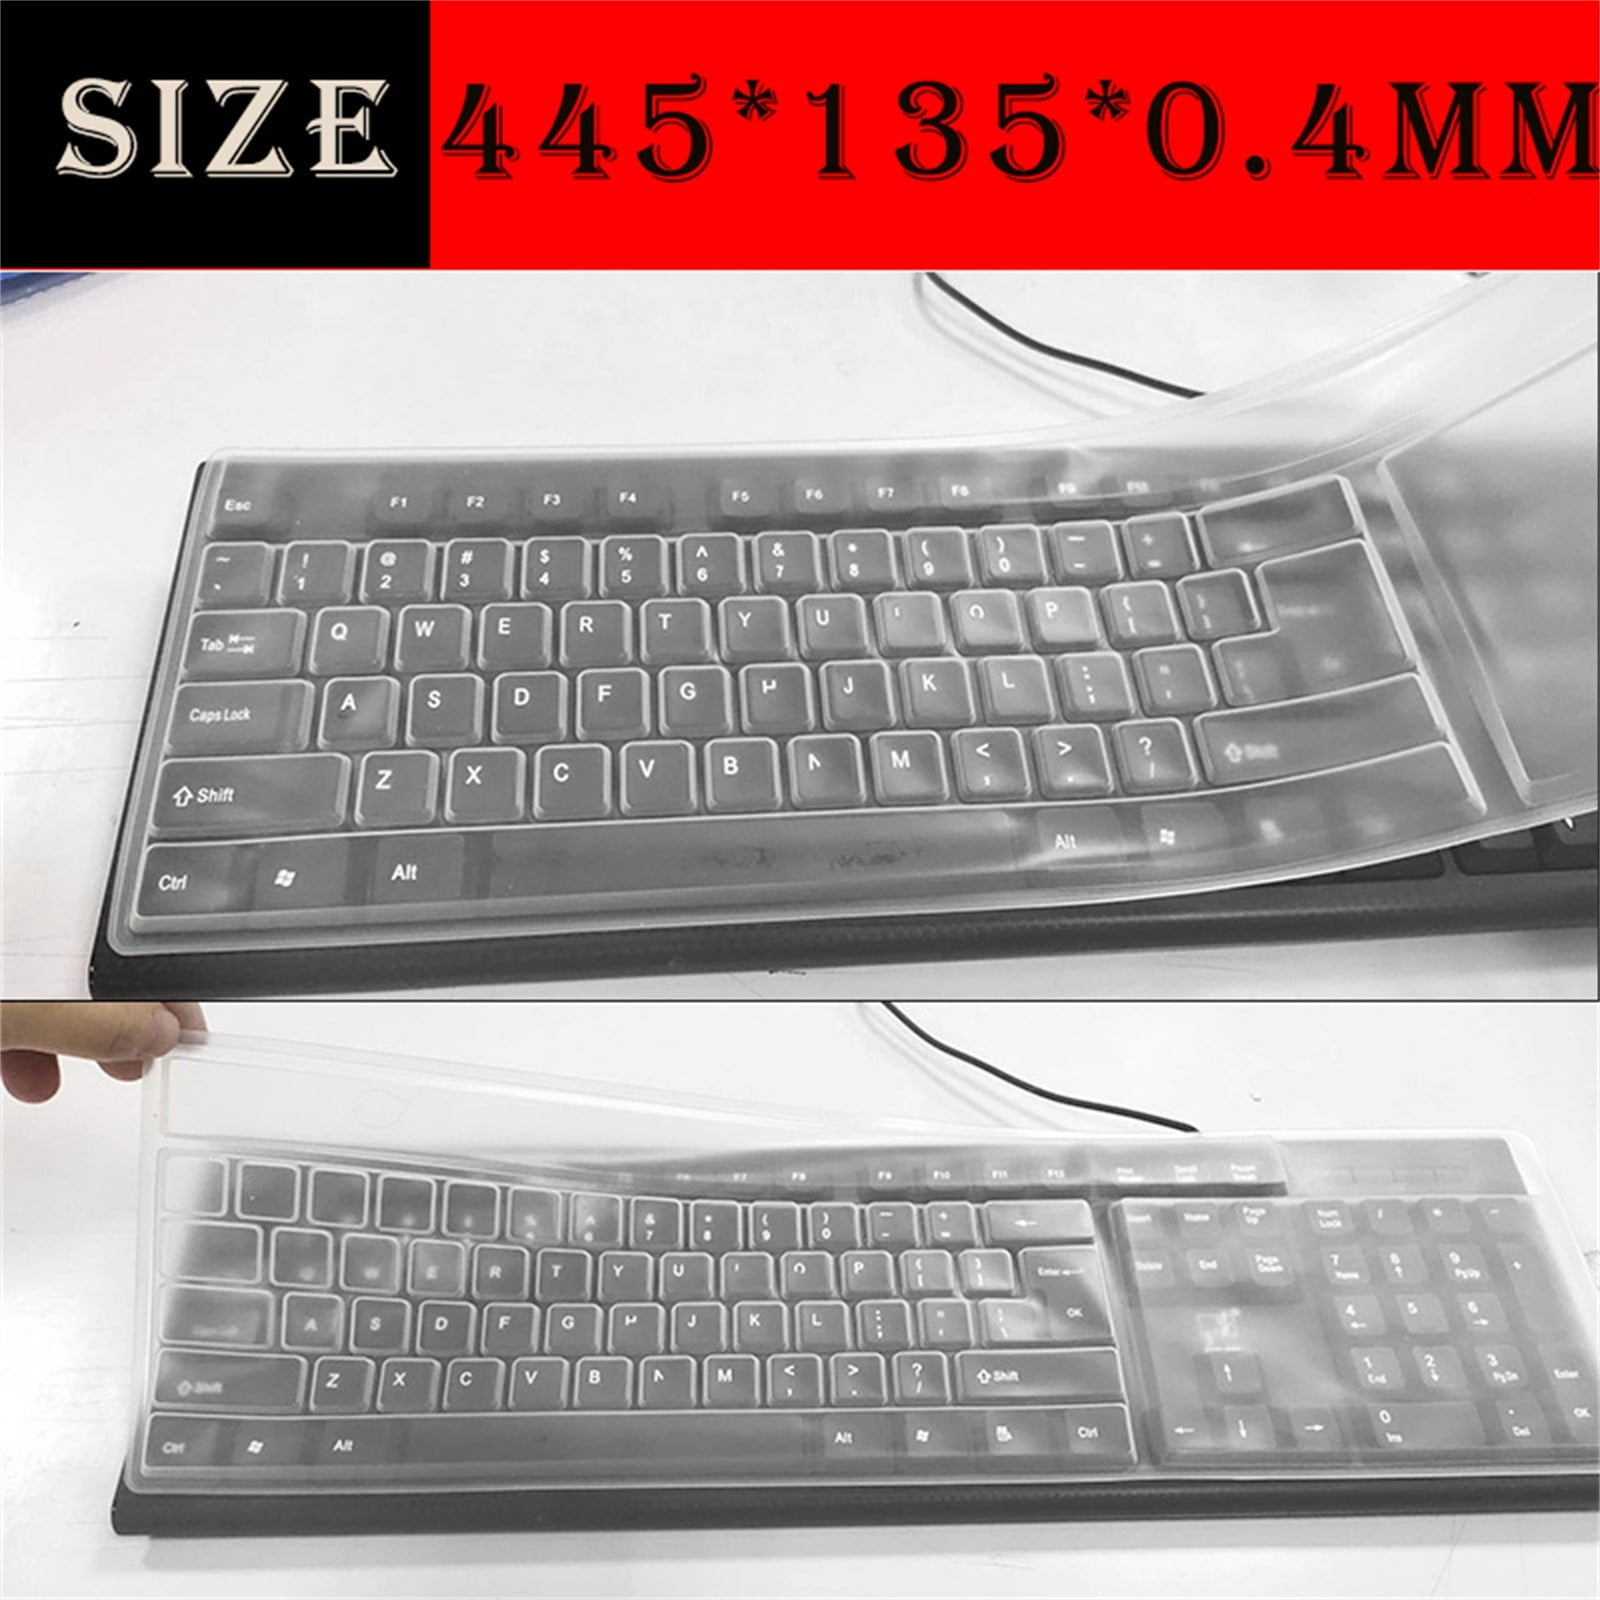 1PC colorful silicone universal desktop computer keyboard cover skin protectorSN 